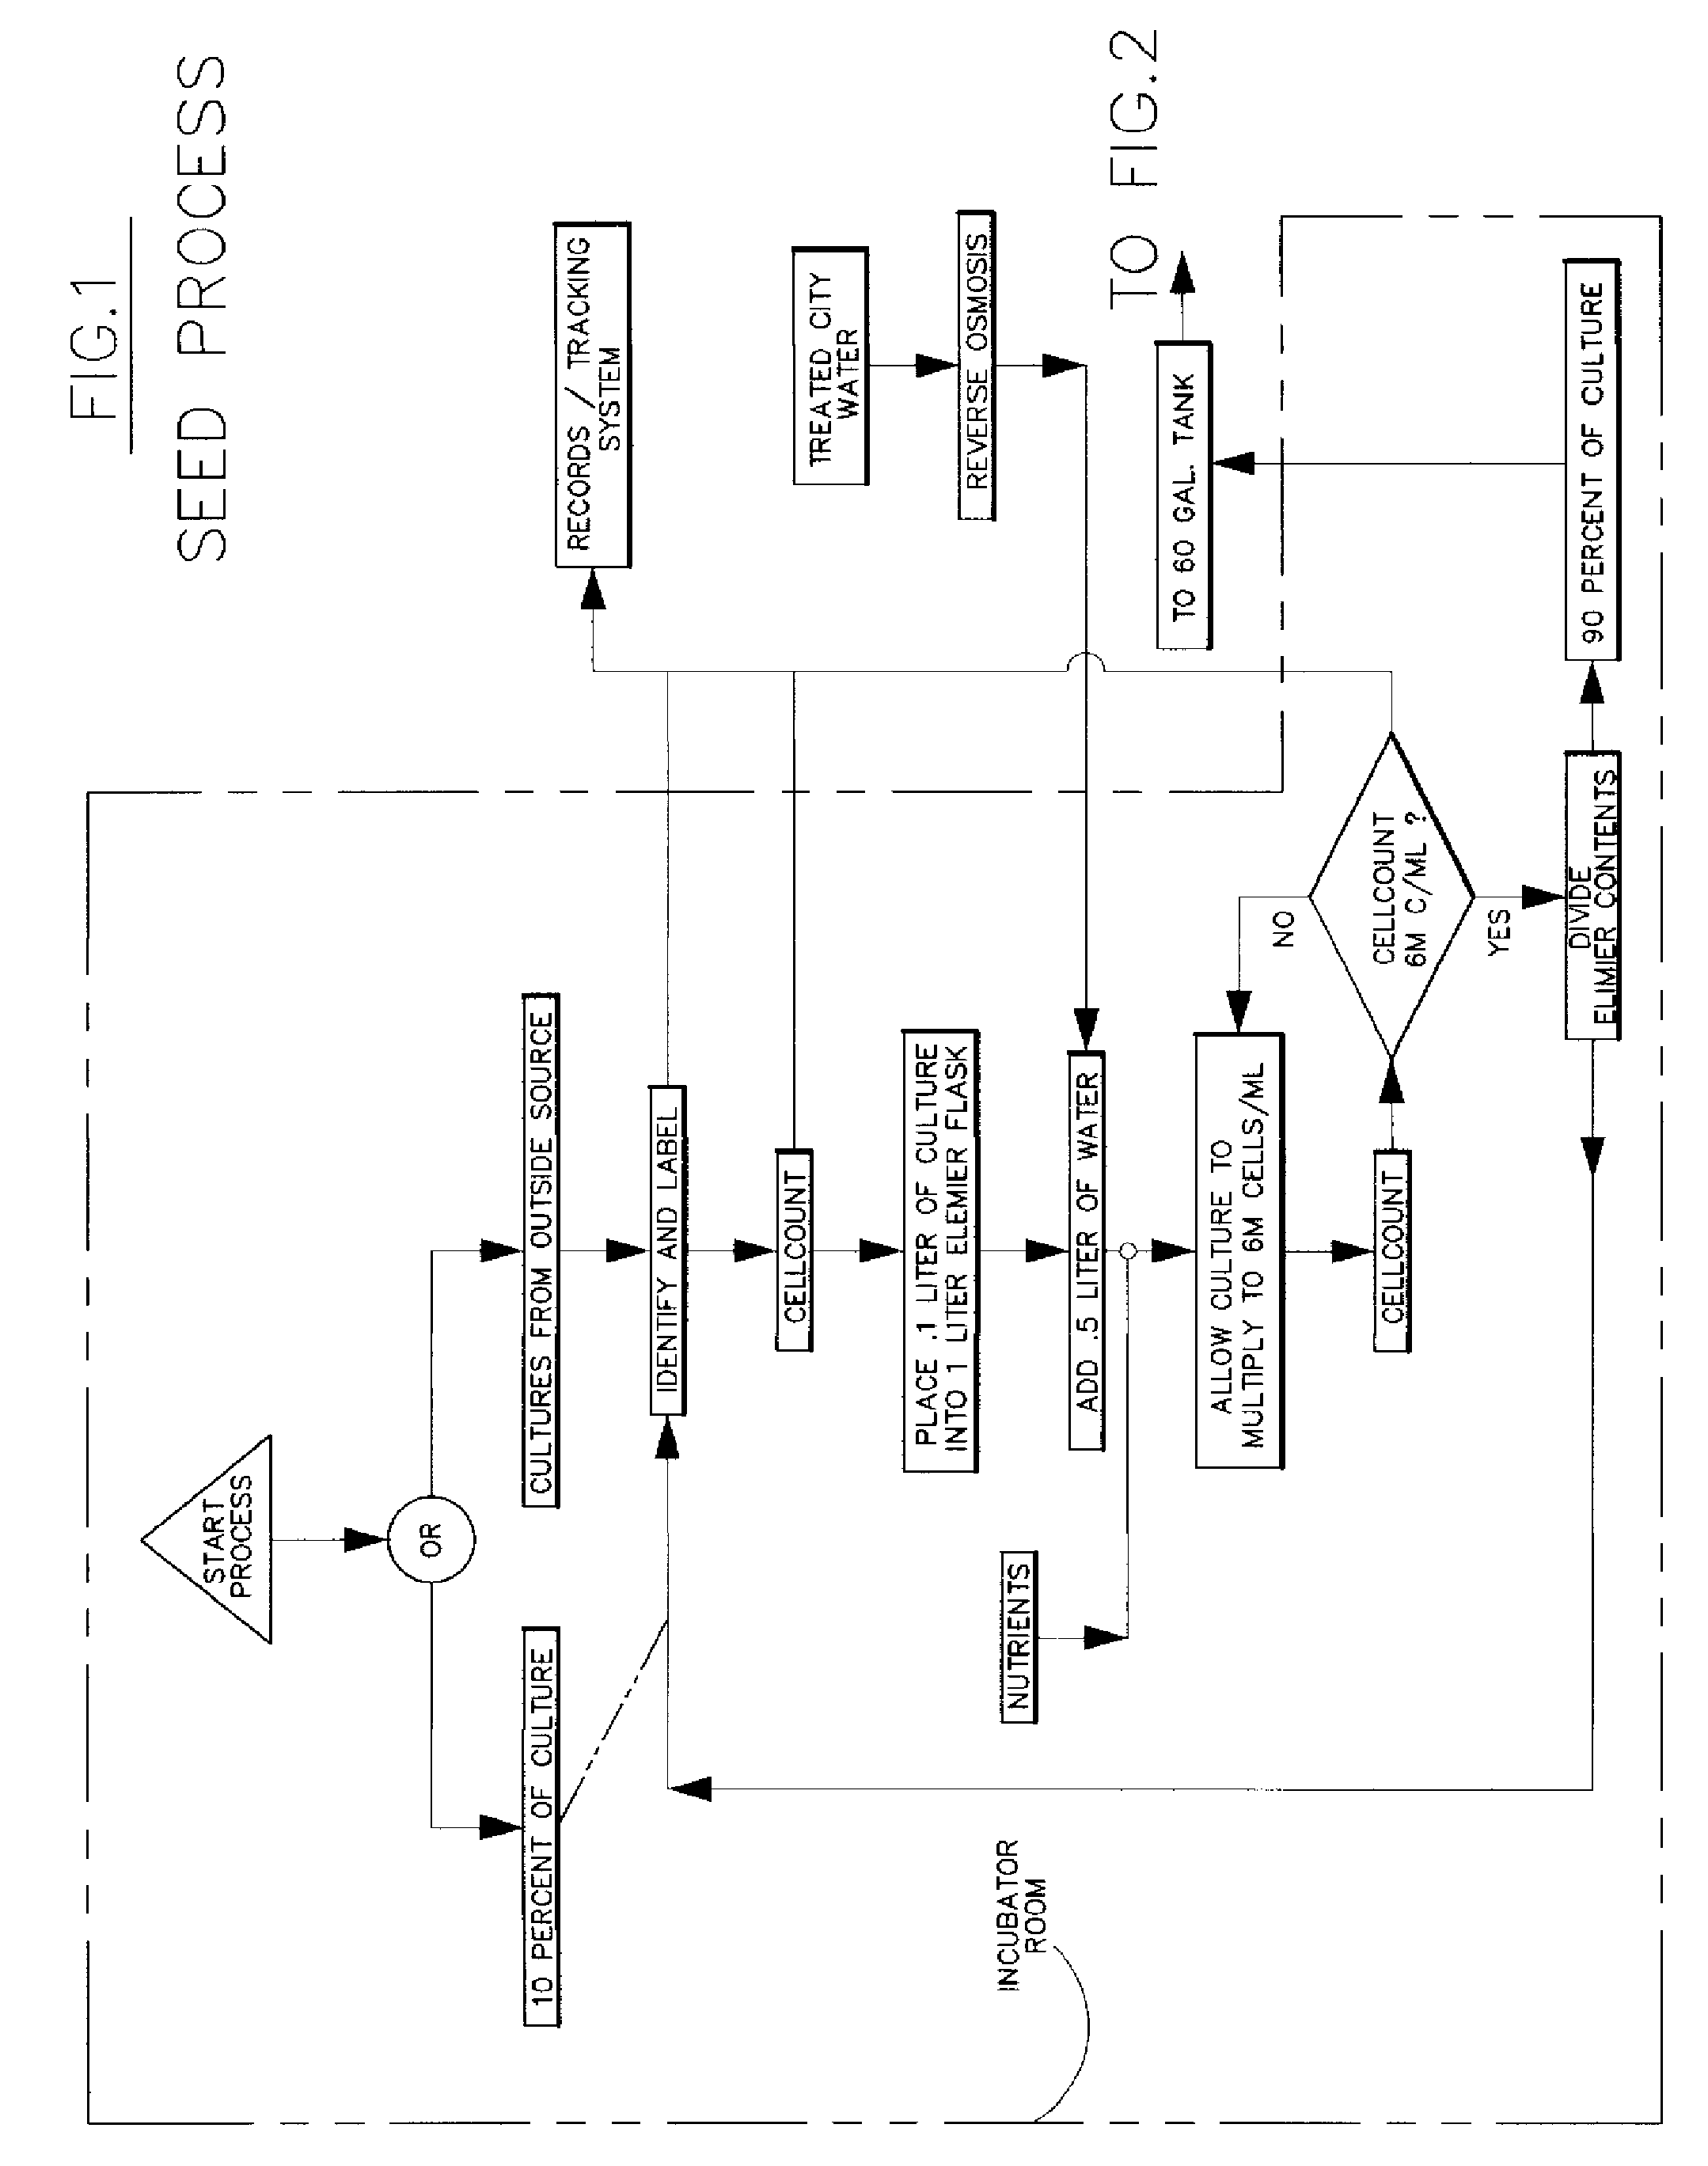 Comprehensive system and method for producing algae